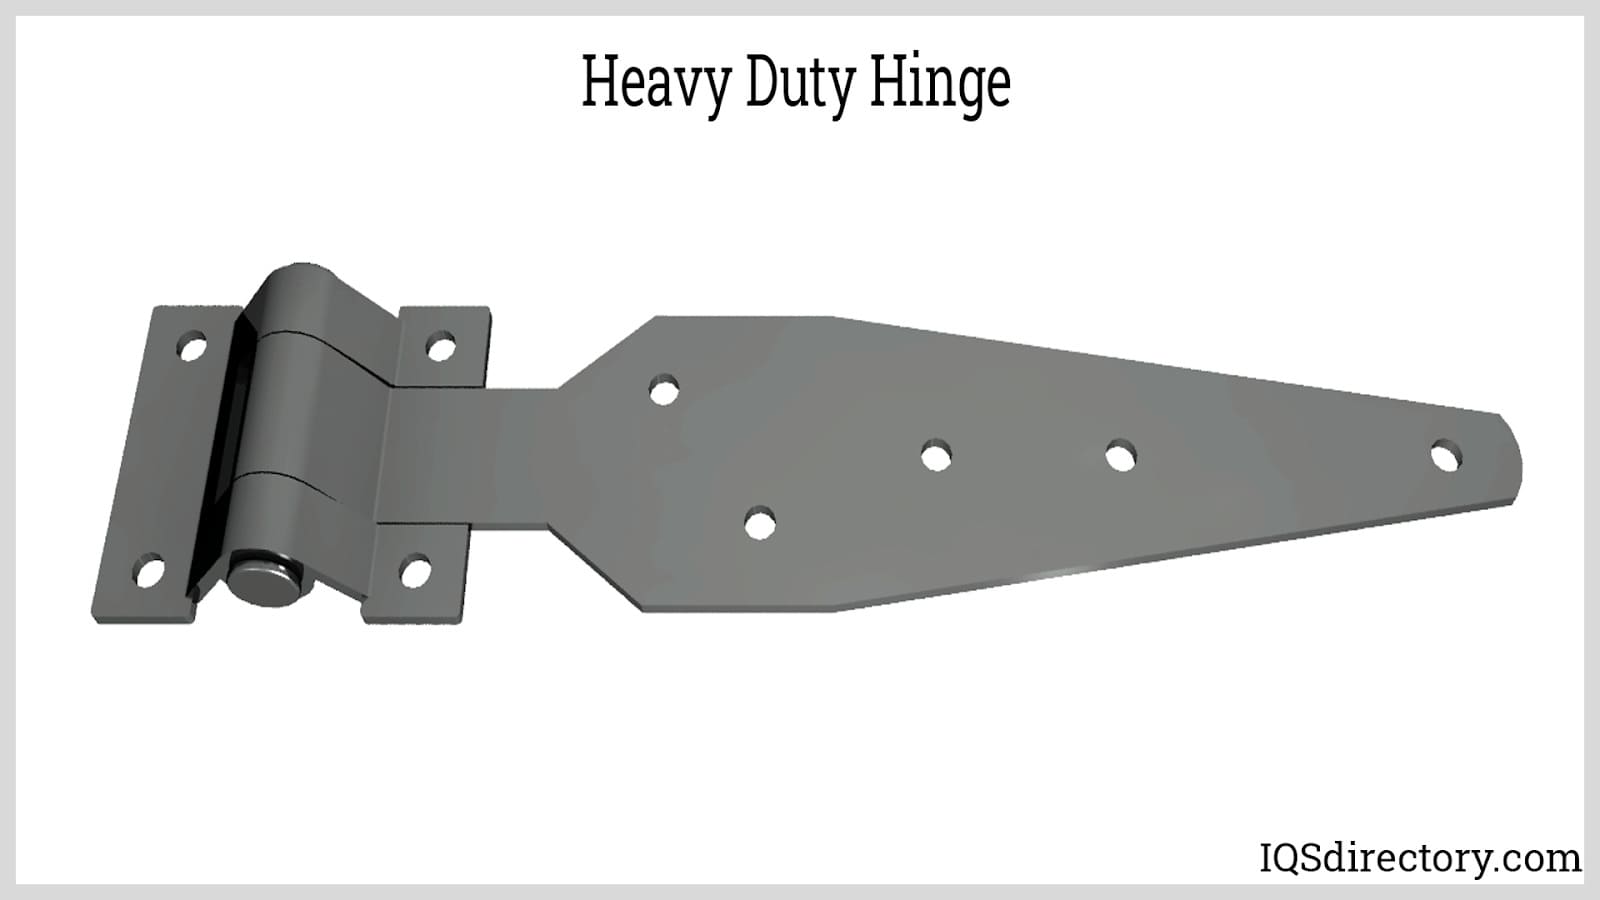 Heavy Duty Hinge for Cold Storage Doors